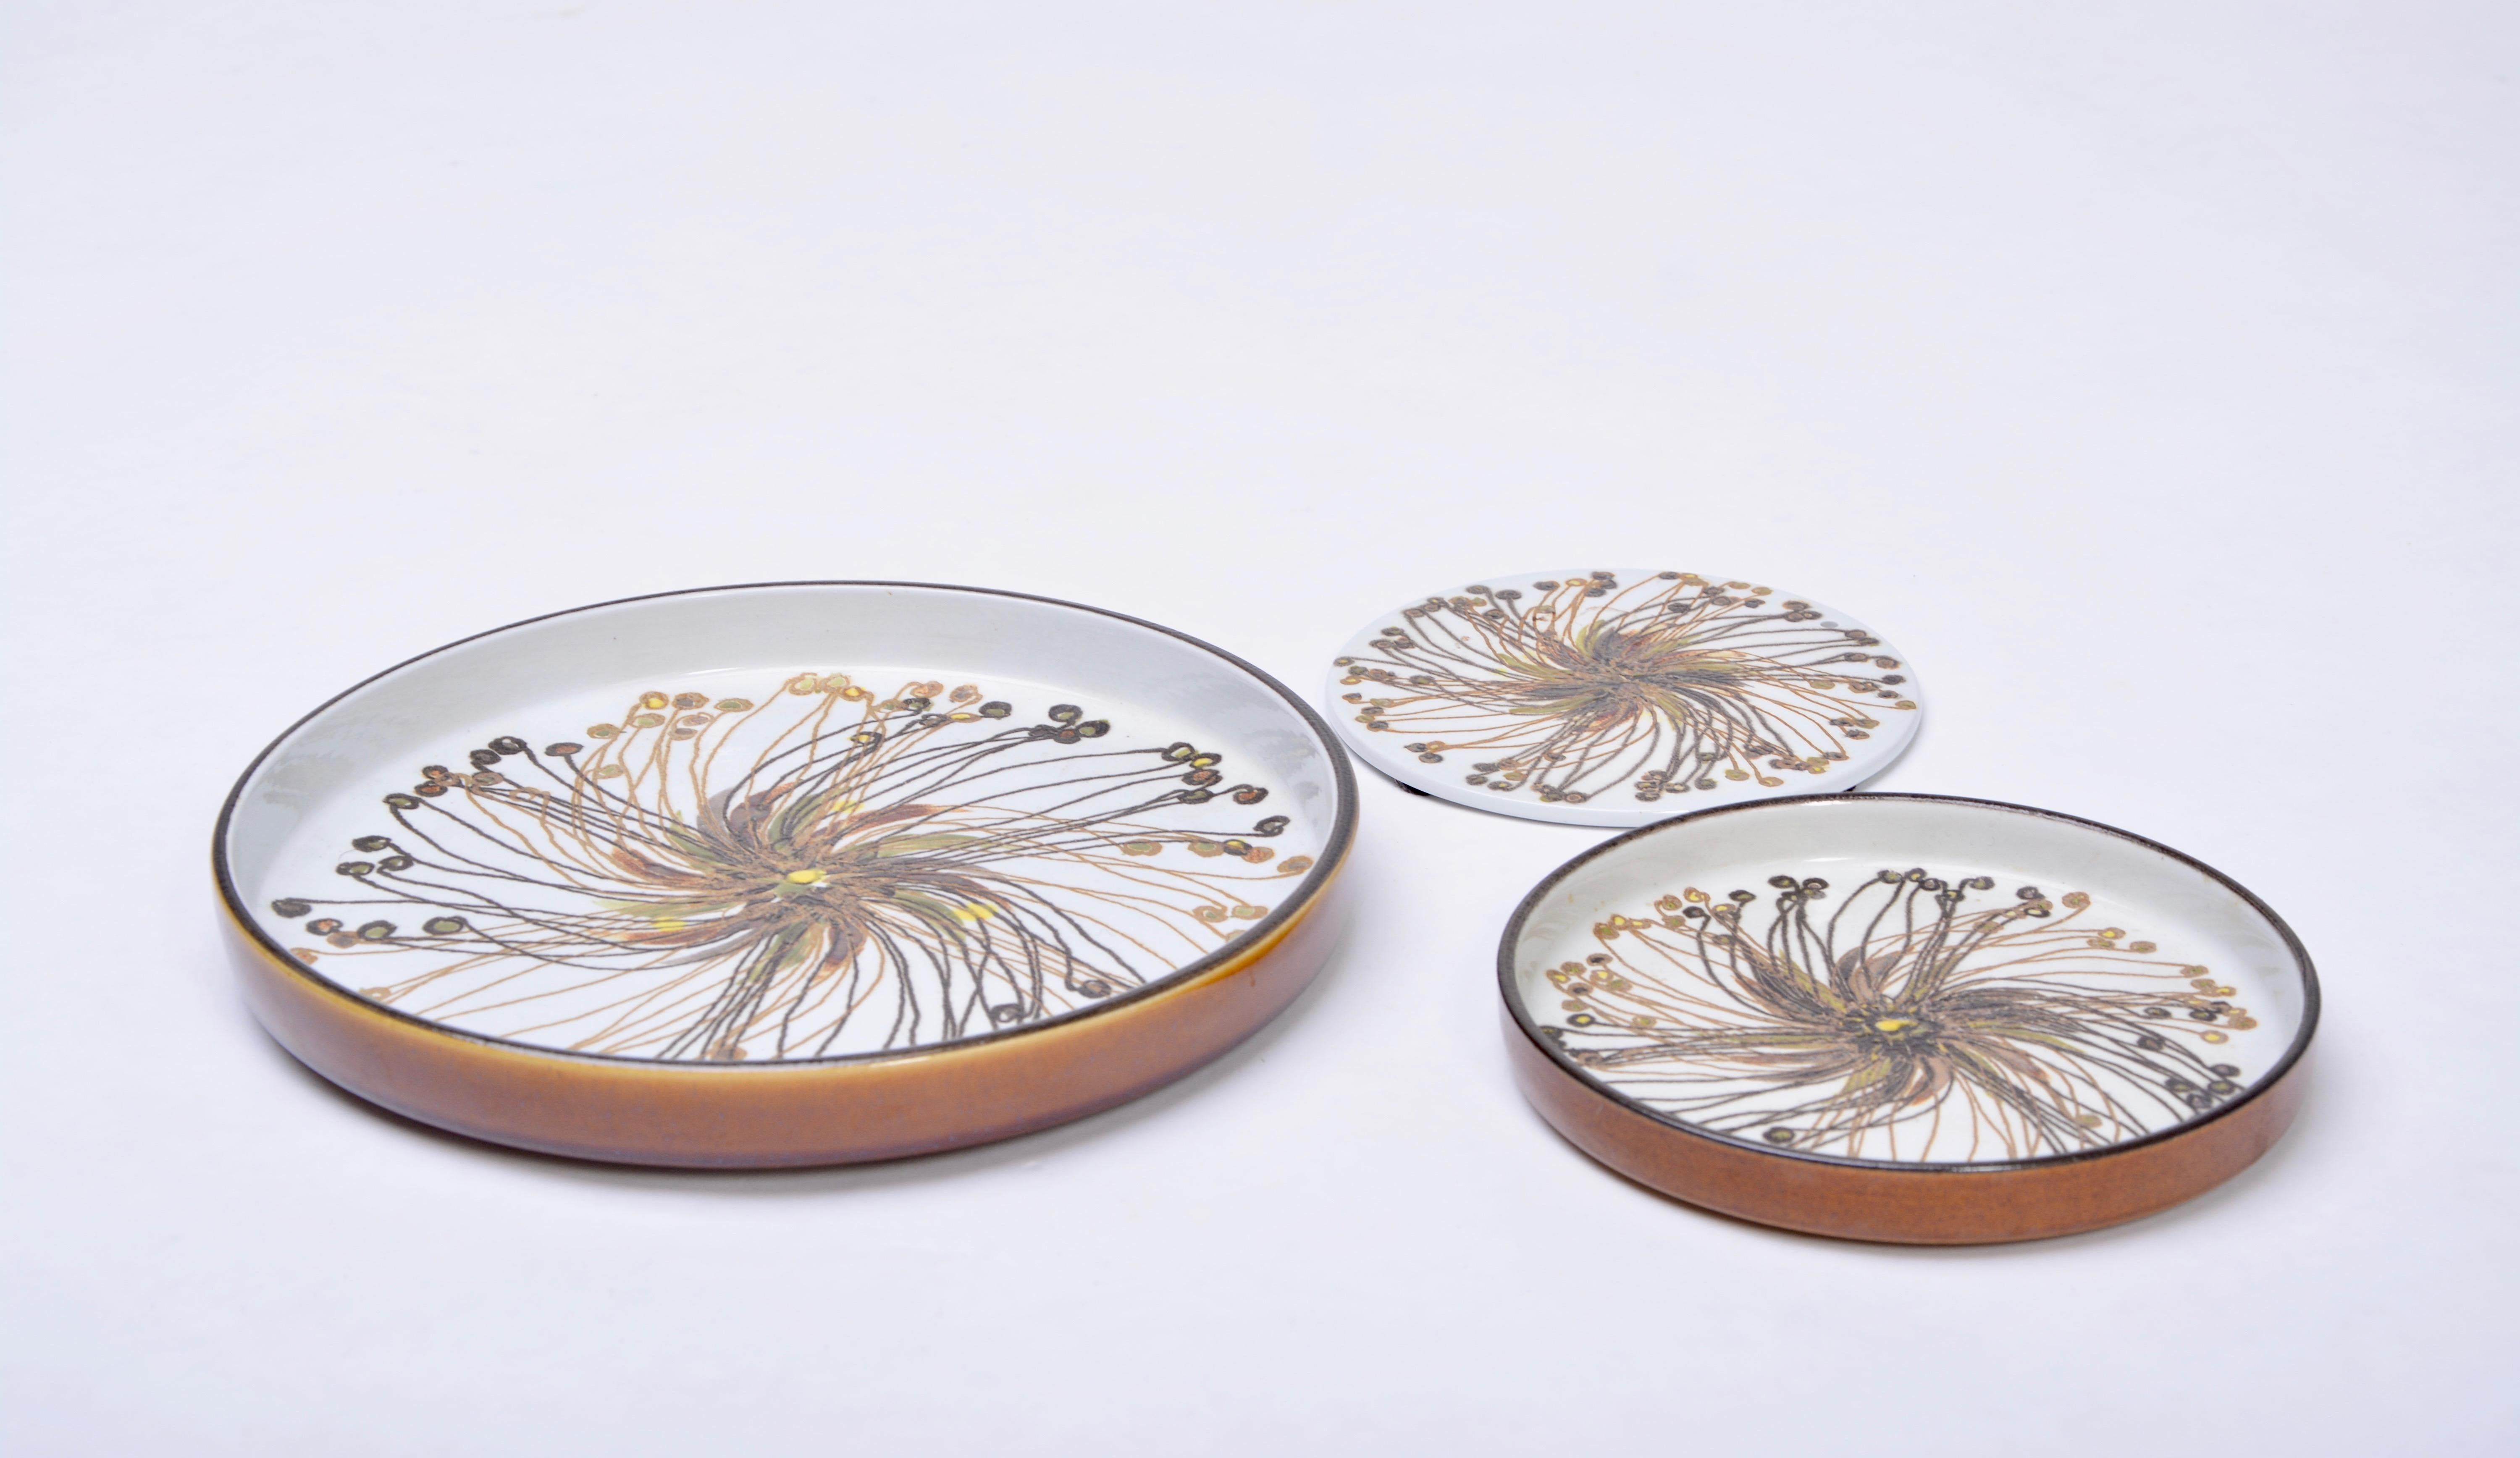 Set of 3 Mid-Century Modern BACA Fajence plates by Ellen Malmer for Royal Copenhagen

This set of three flower plates crafted by the artist Ellen Malmer for Royal Copenhagen. They feature a brown/yellow flower pattern with a white background. Ellen